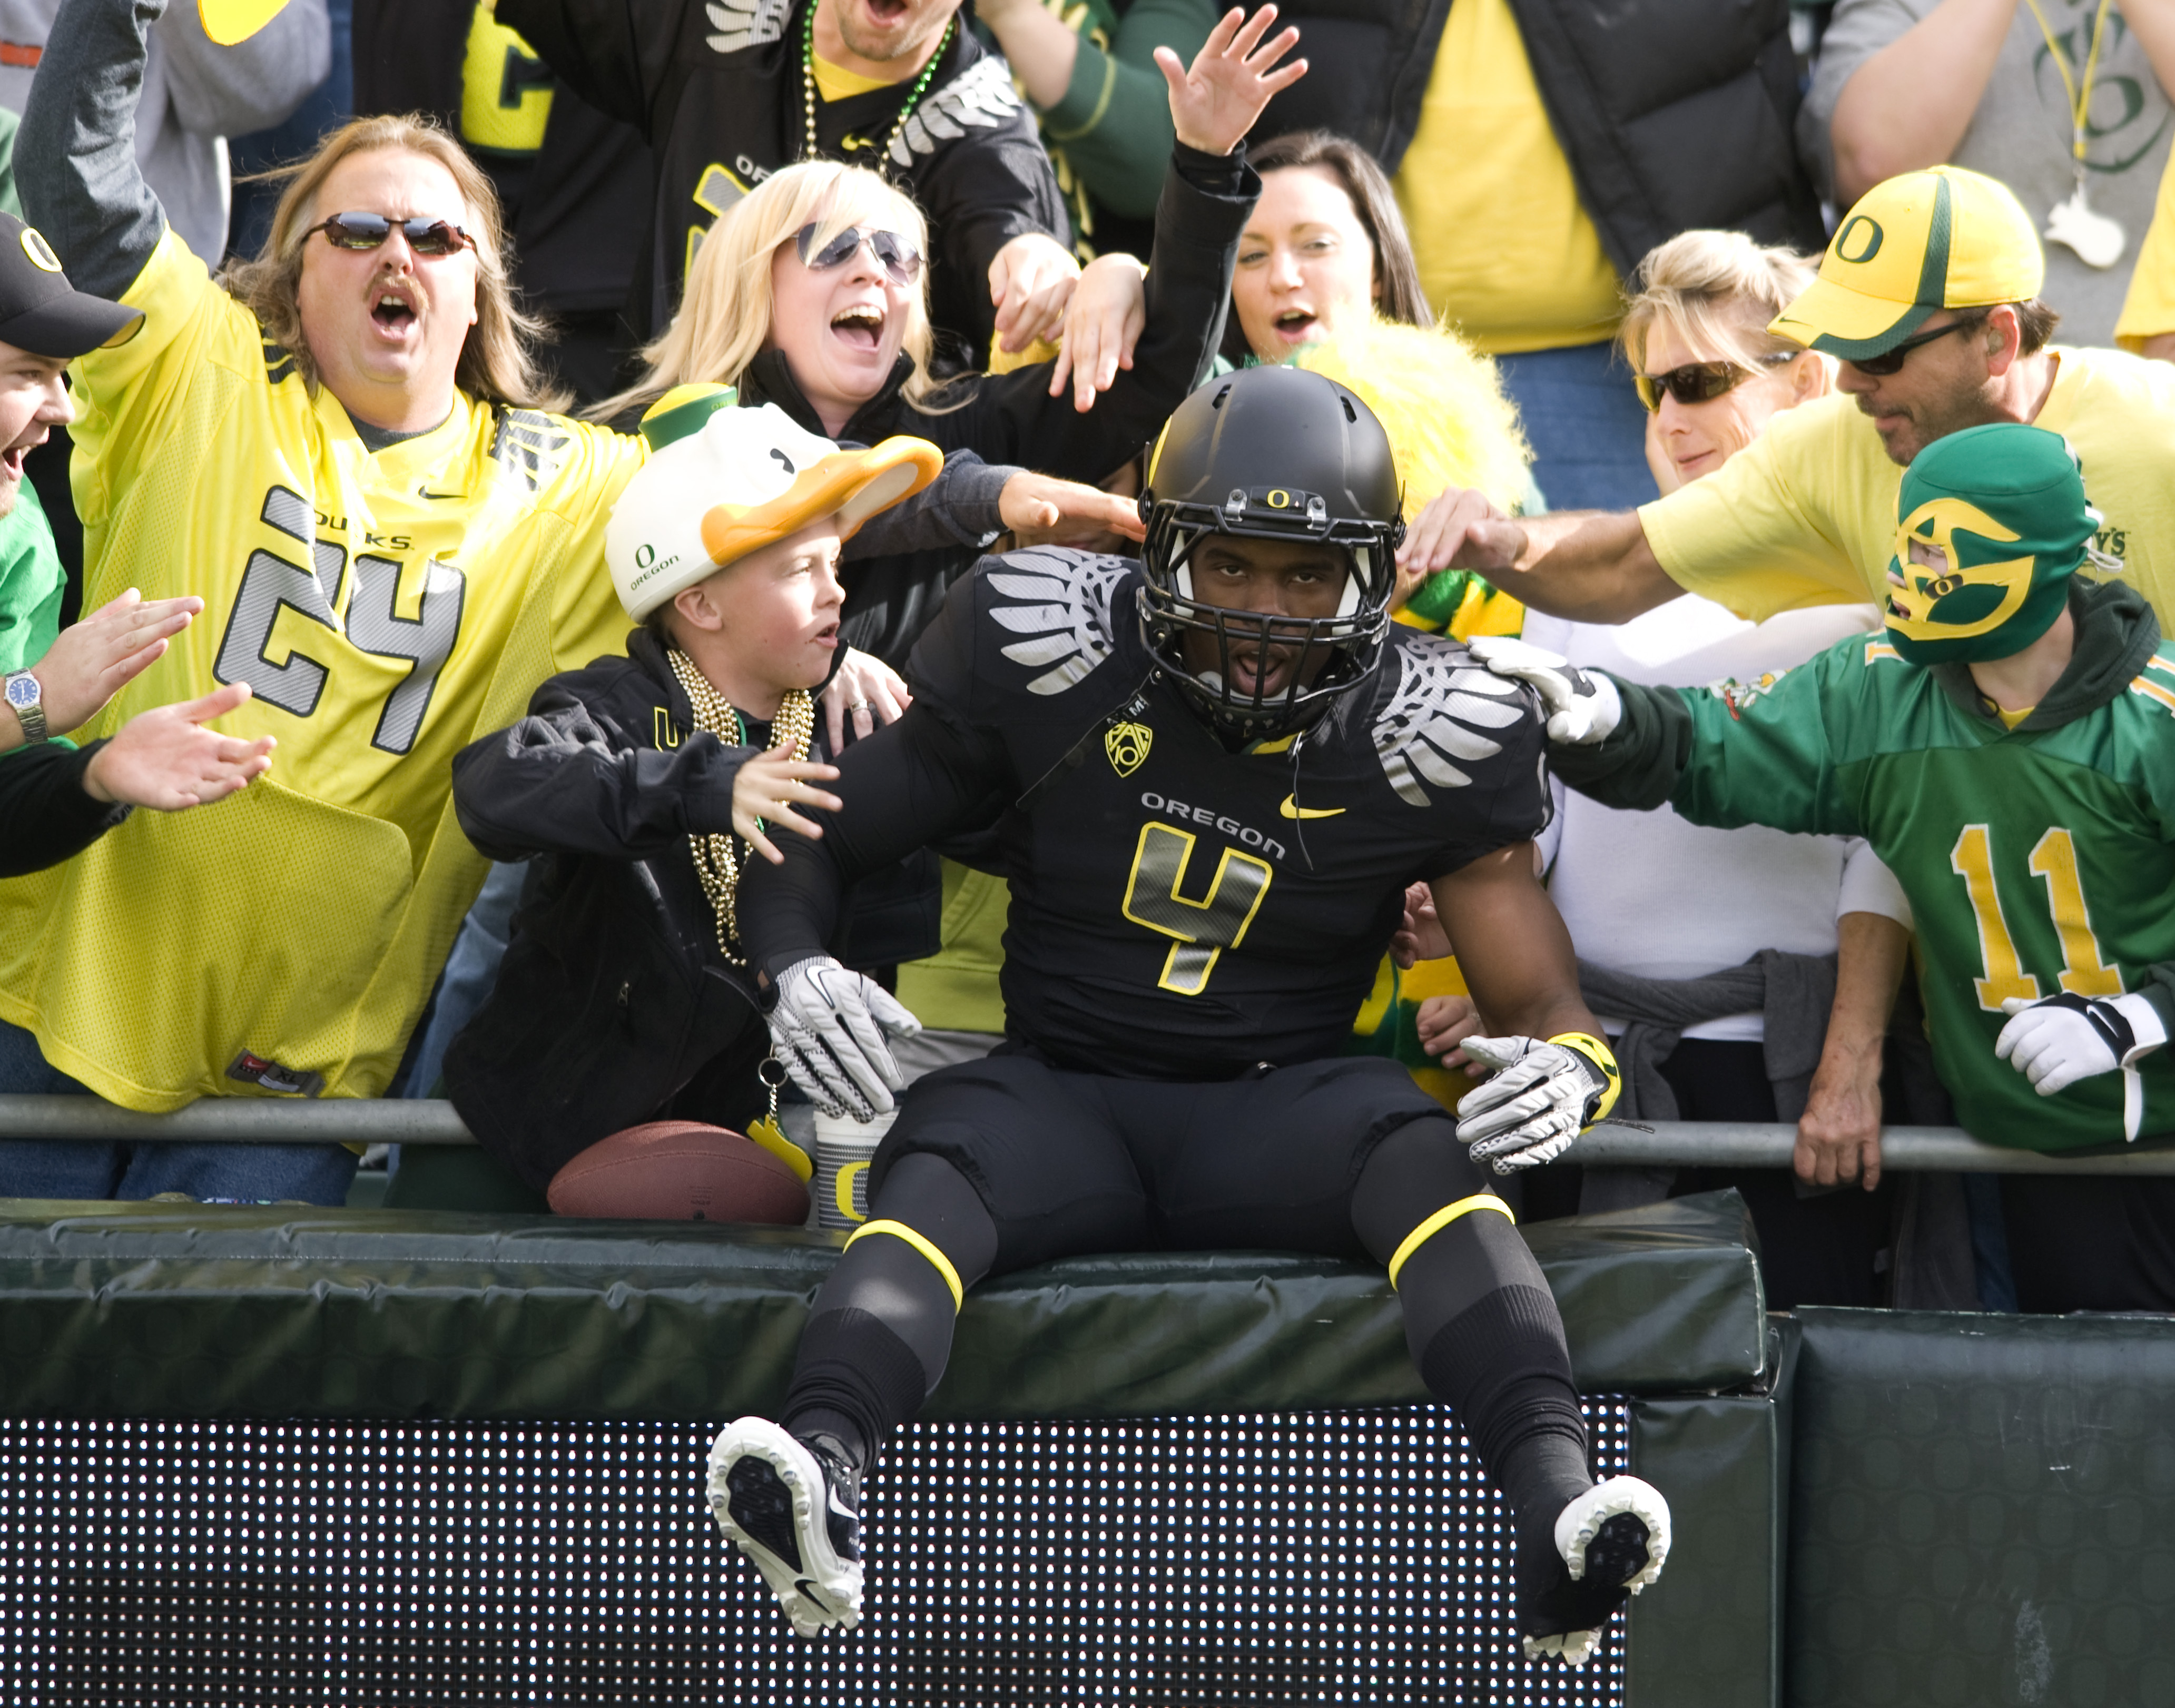 EUGENE, OR - NOVEMBER 6: Wide receiver Josh Huff #4 of the Oregon Ducks jumps into the crowd during the team introductions before the game against the Washington Huskies at Autzen Stadium on November 6, 2010 in Eugene, Oregon. The Ducks won the game 53-16